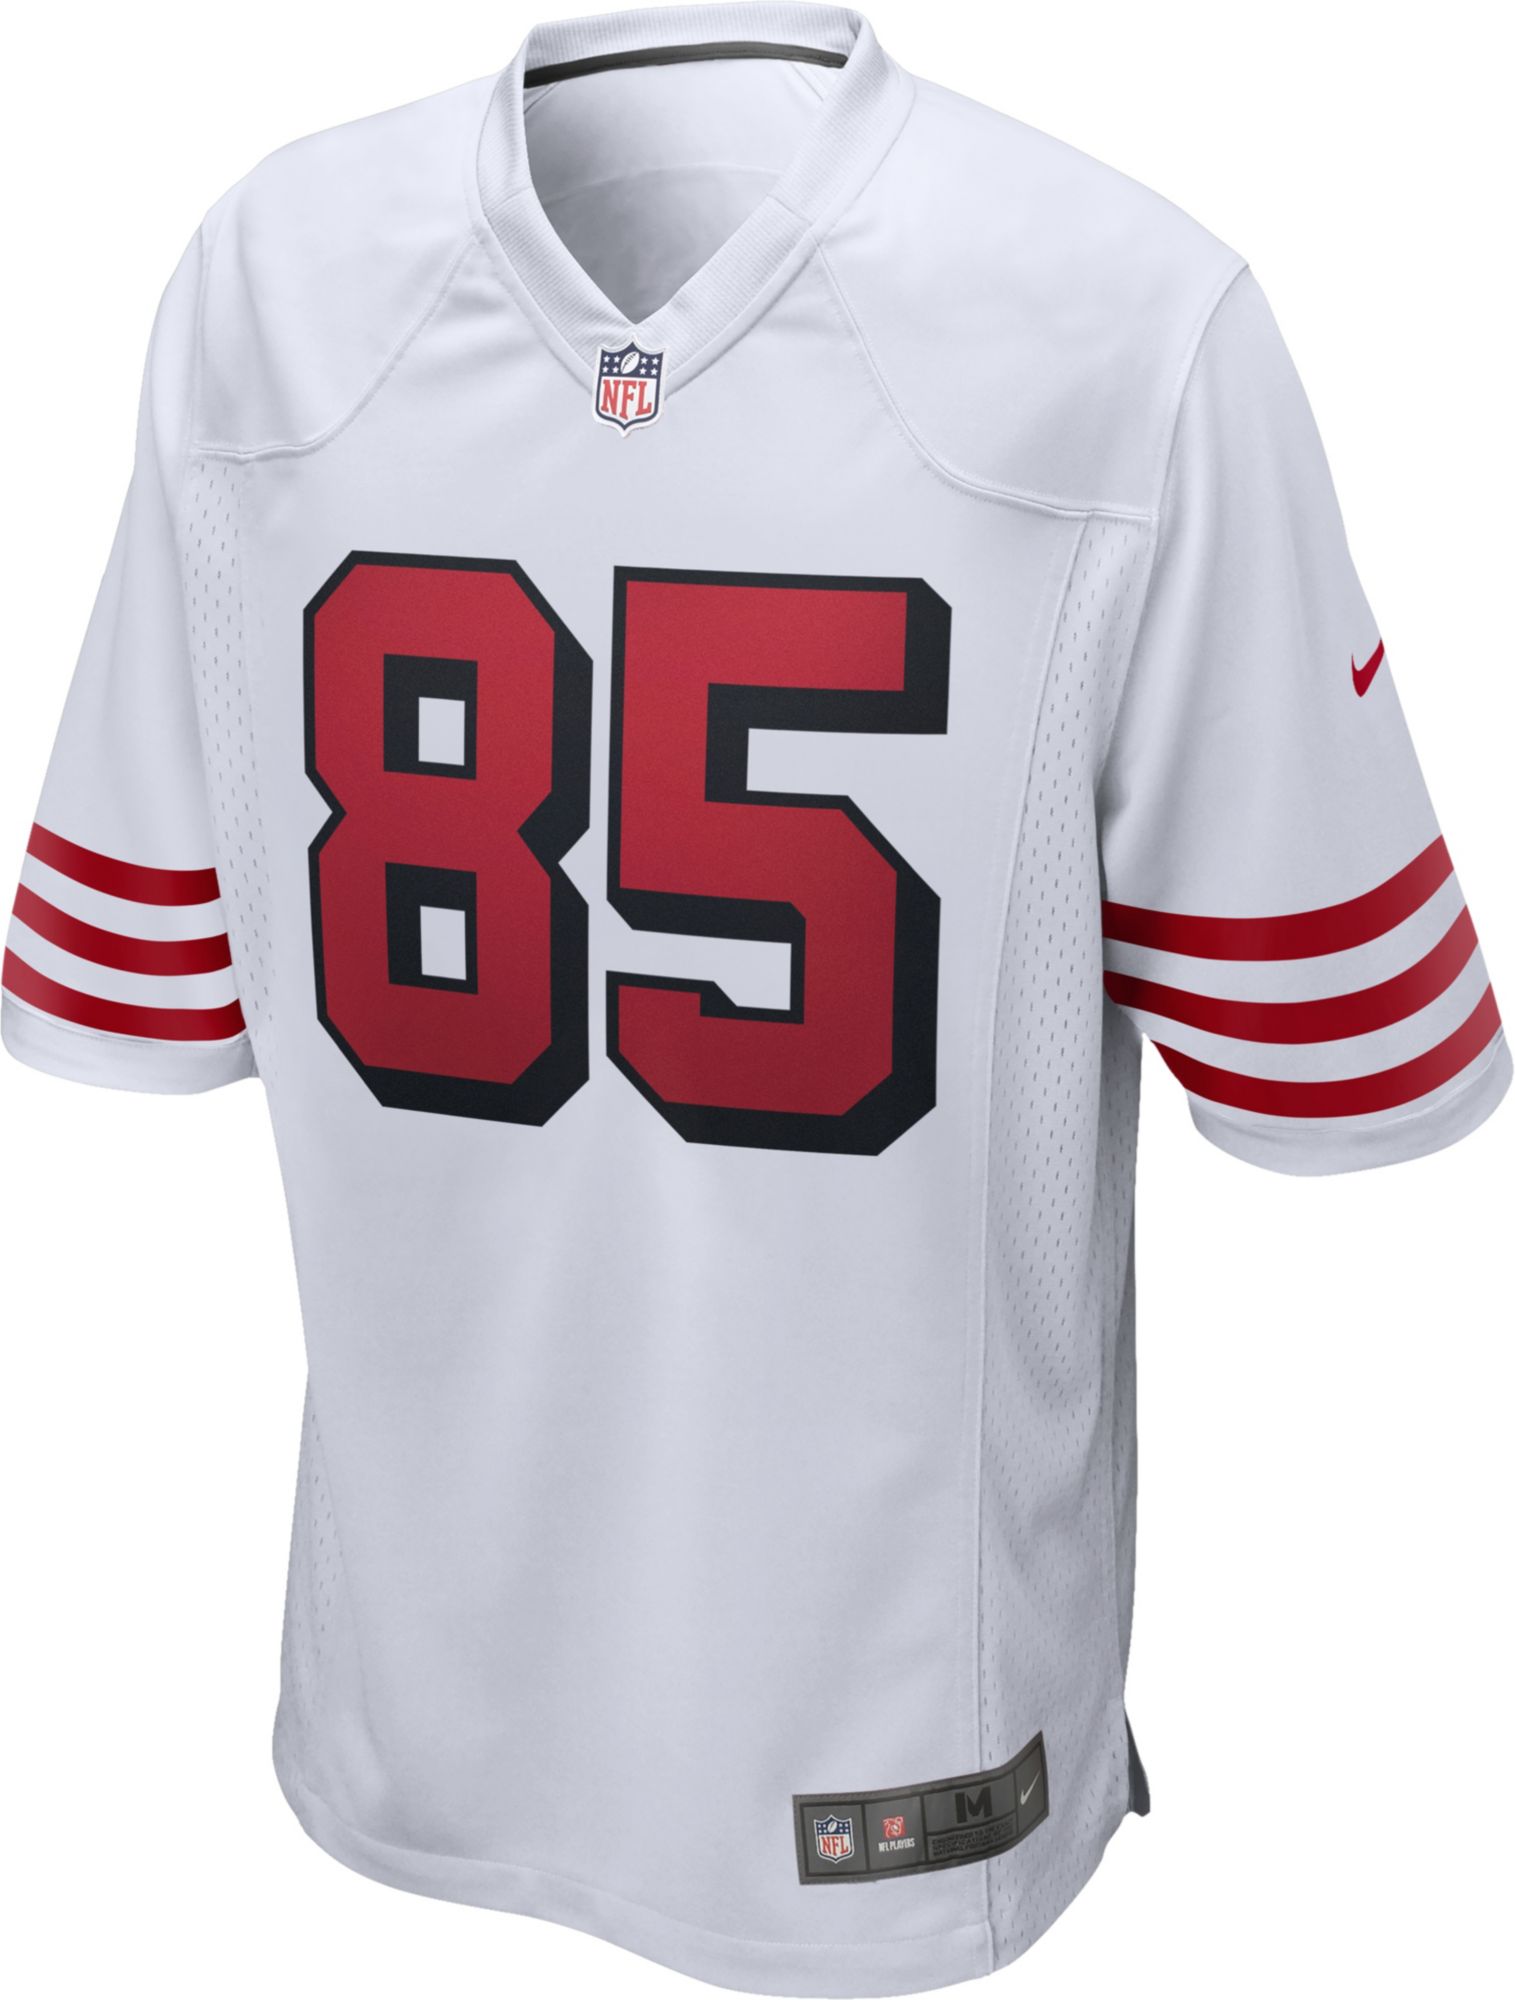 49ers color rush jersey kittle